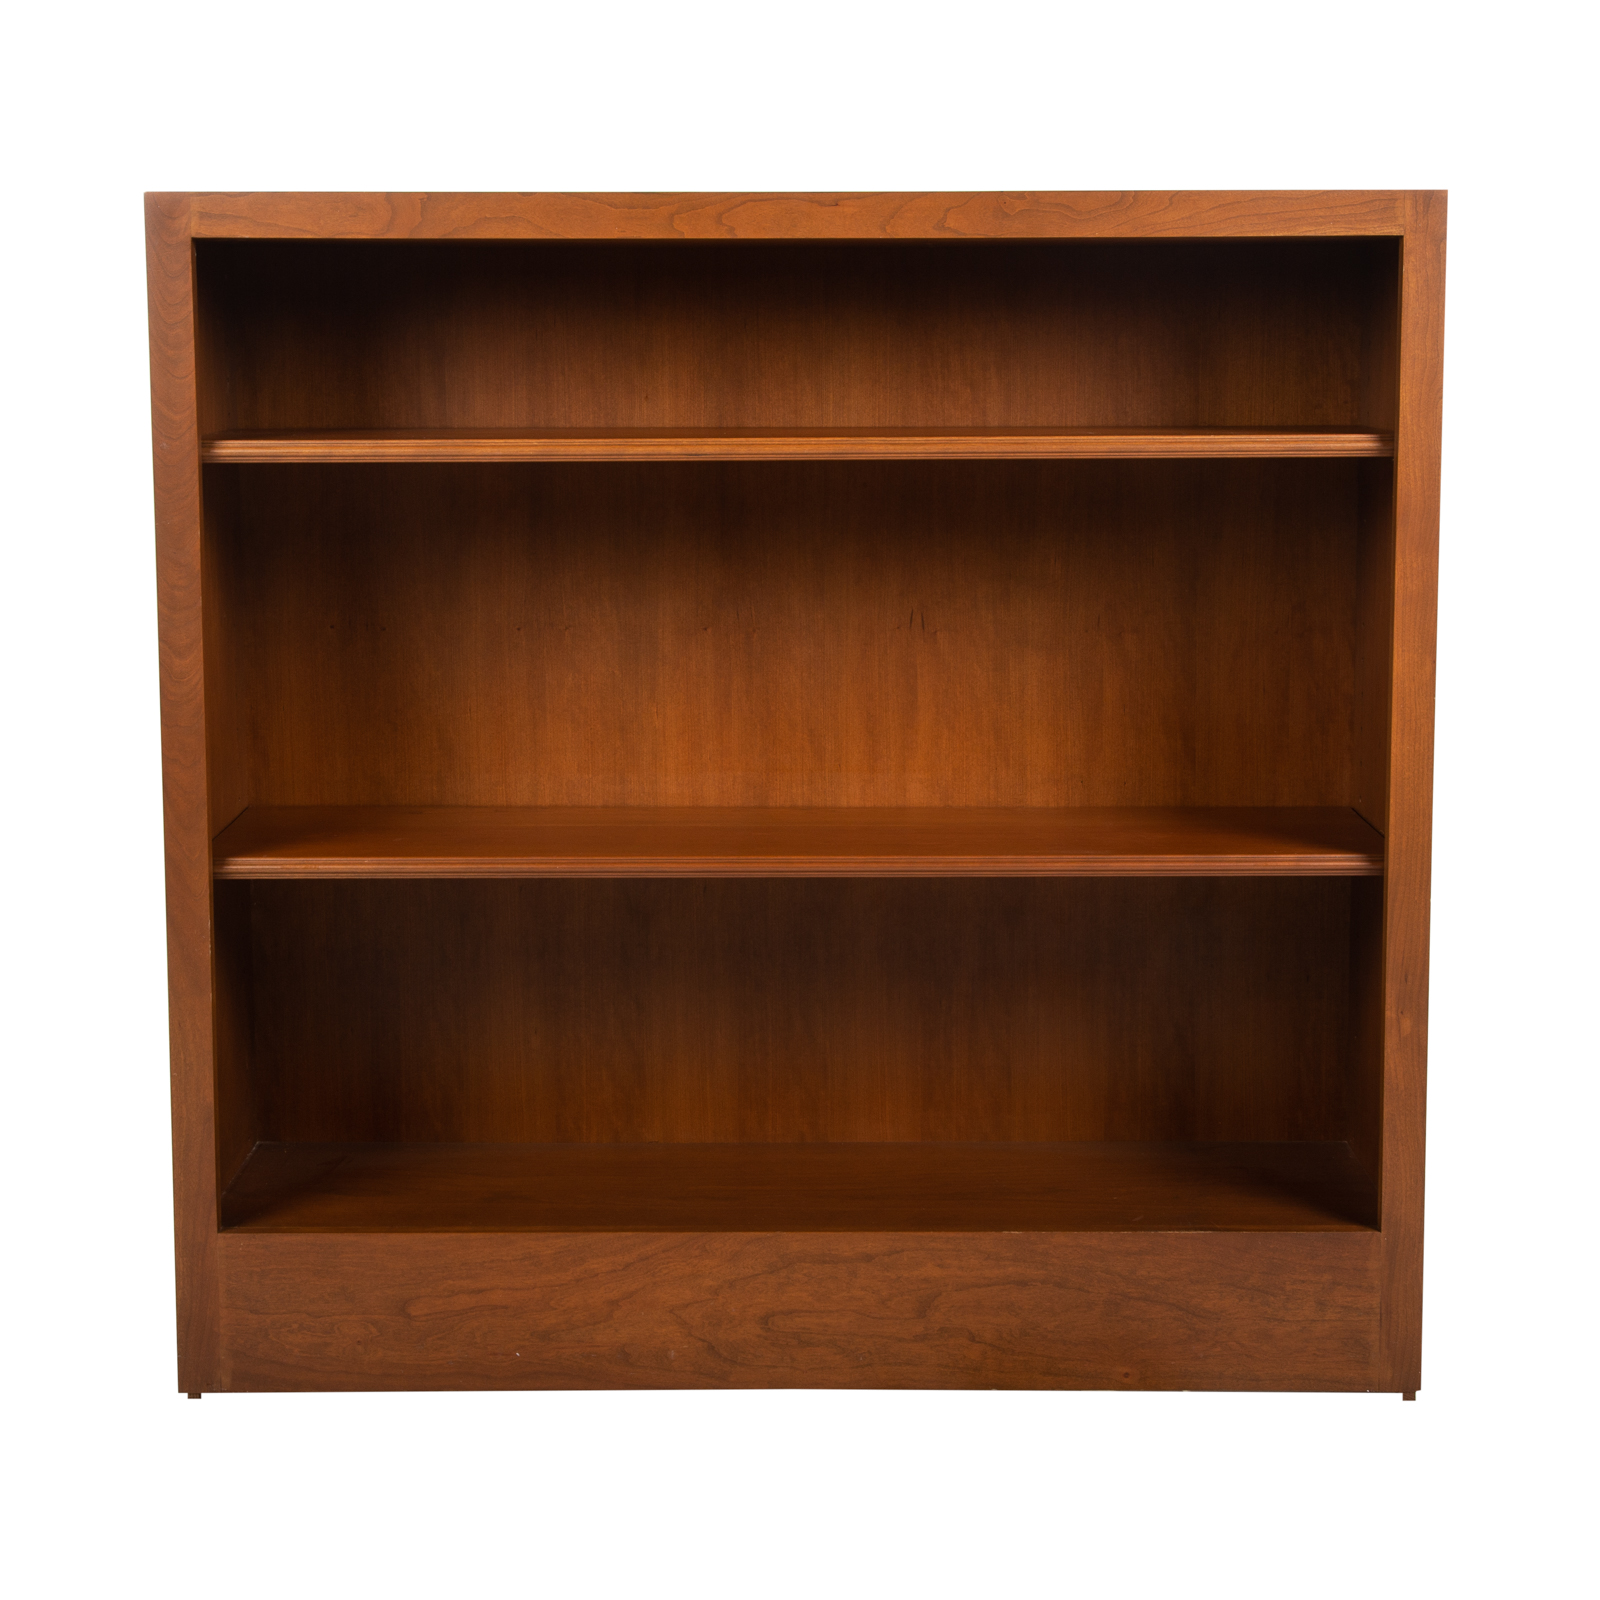 CONTEMPORARY LOW BOOKCASE 21st 3cae53